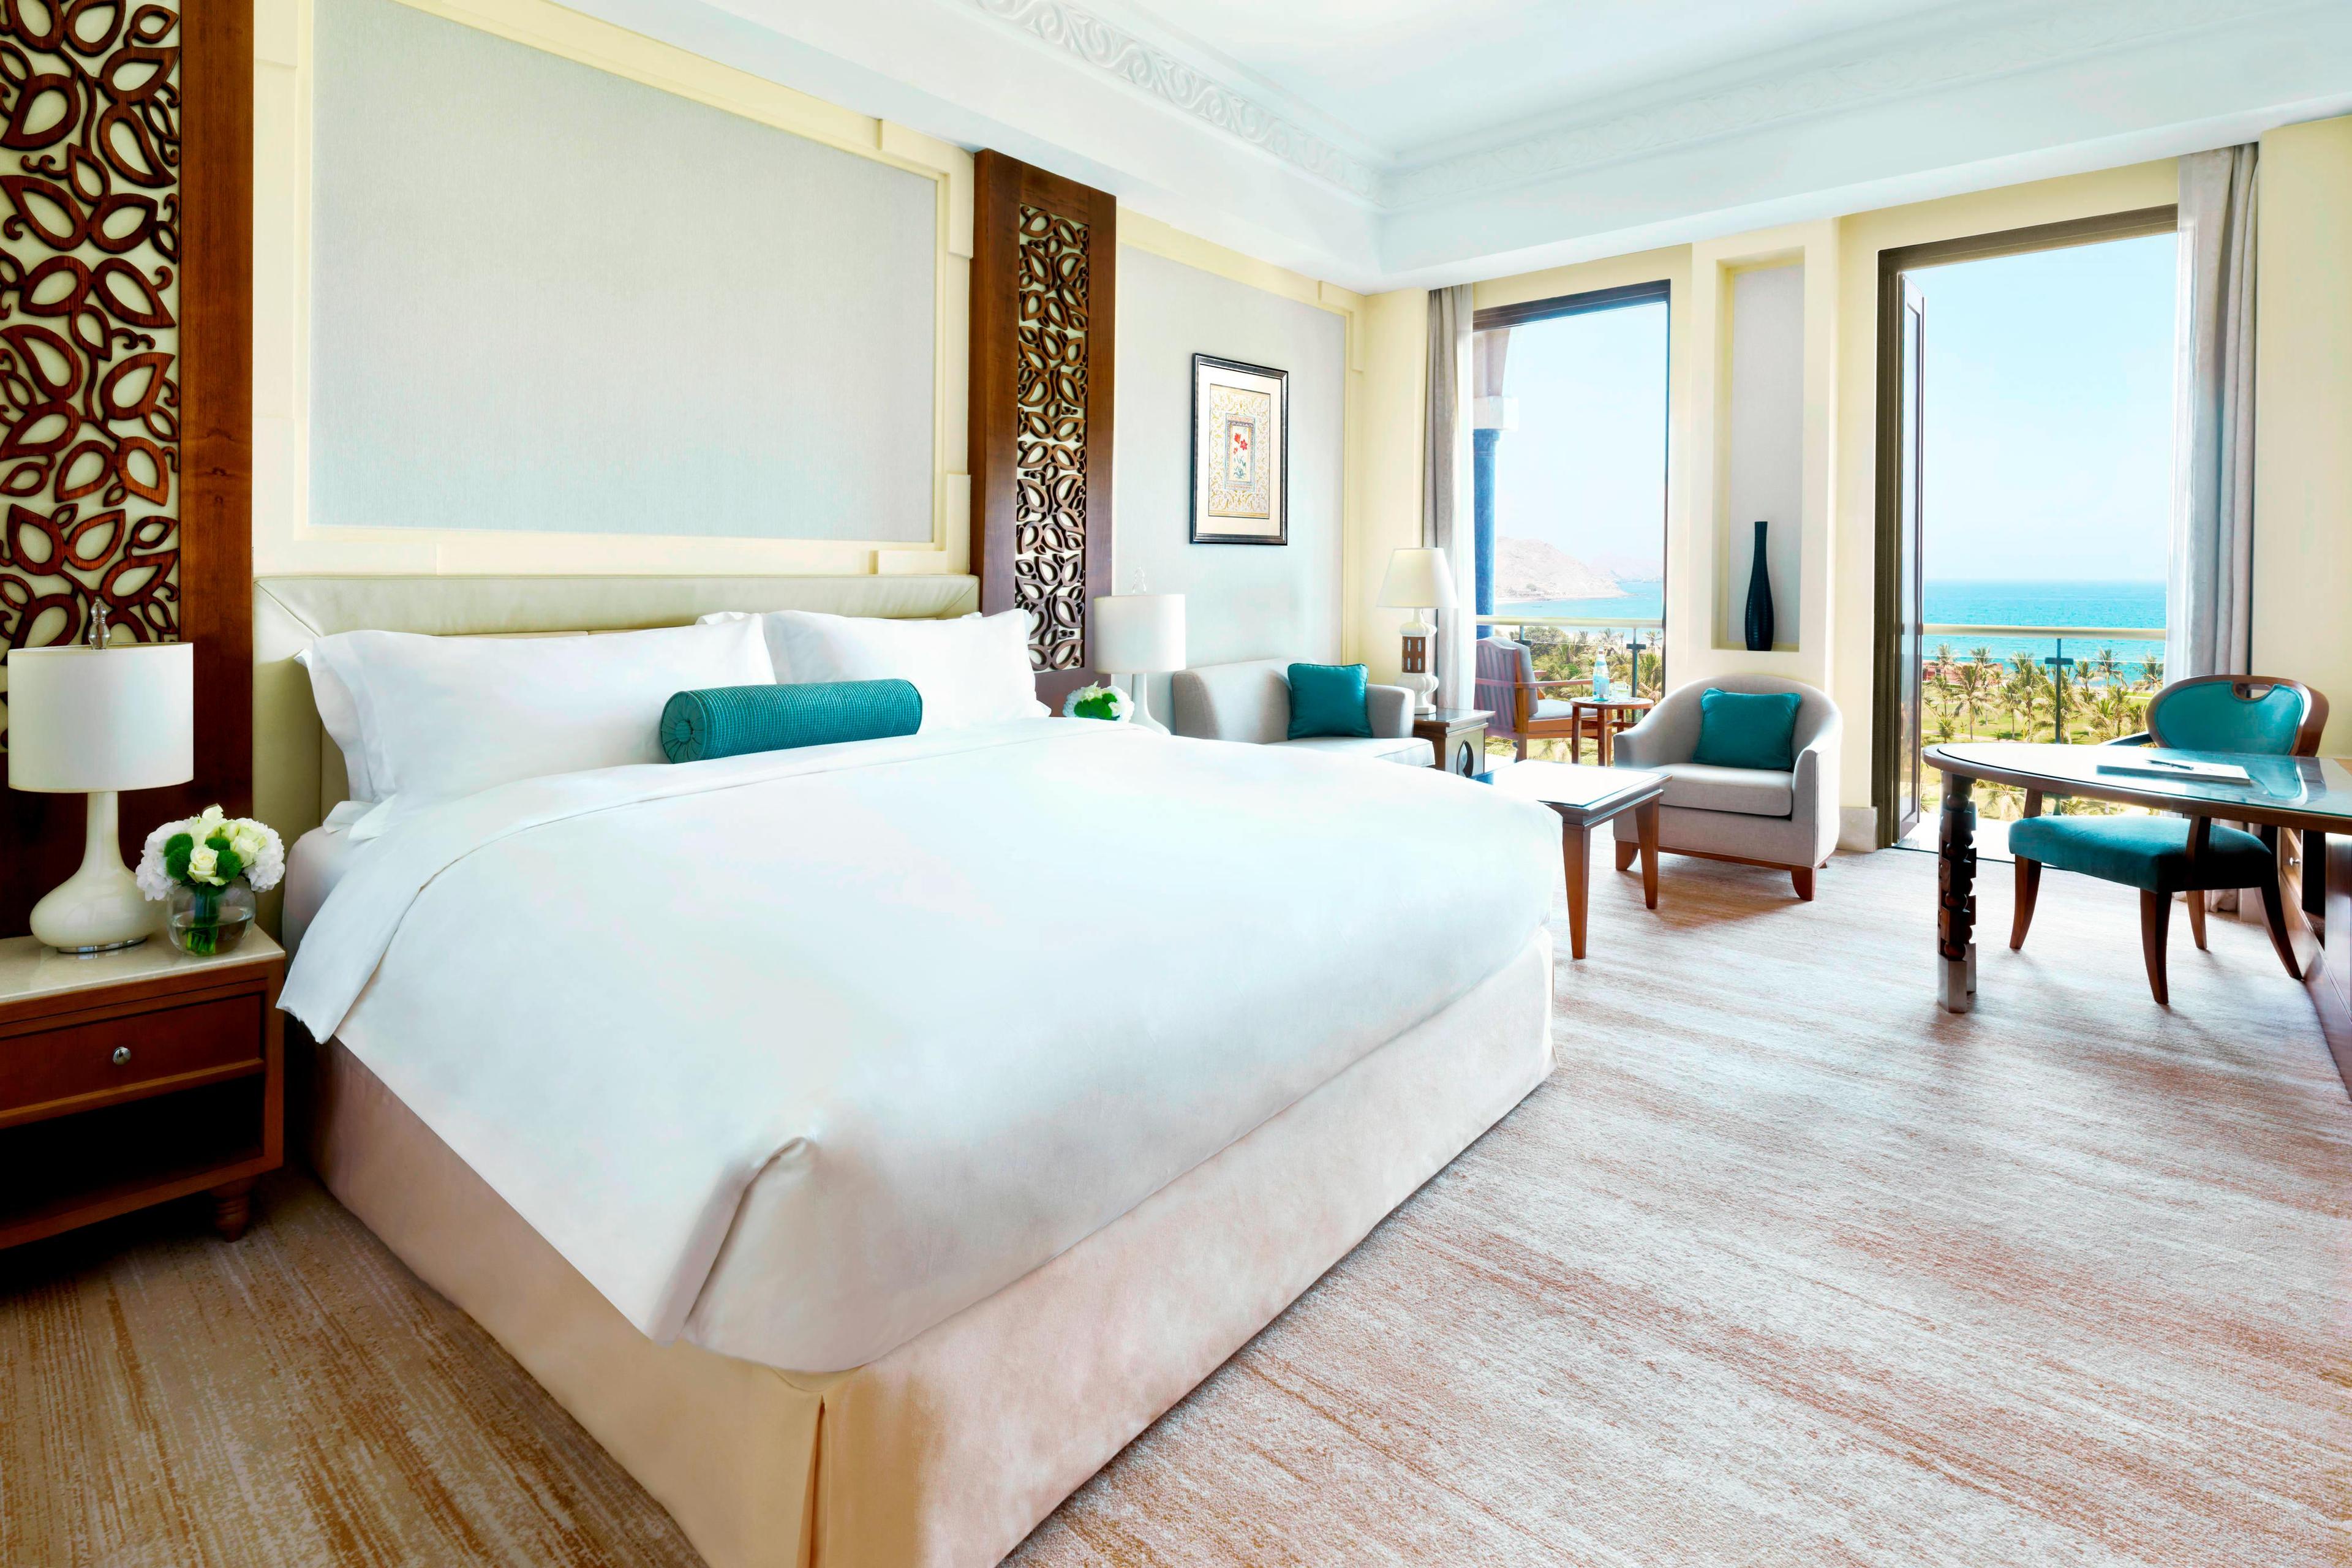 Deluxe Room - Sea View provides space and comfort, and include a private balcony to enjoy unparalleled views of the water.